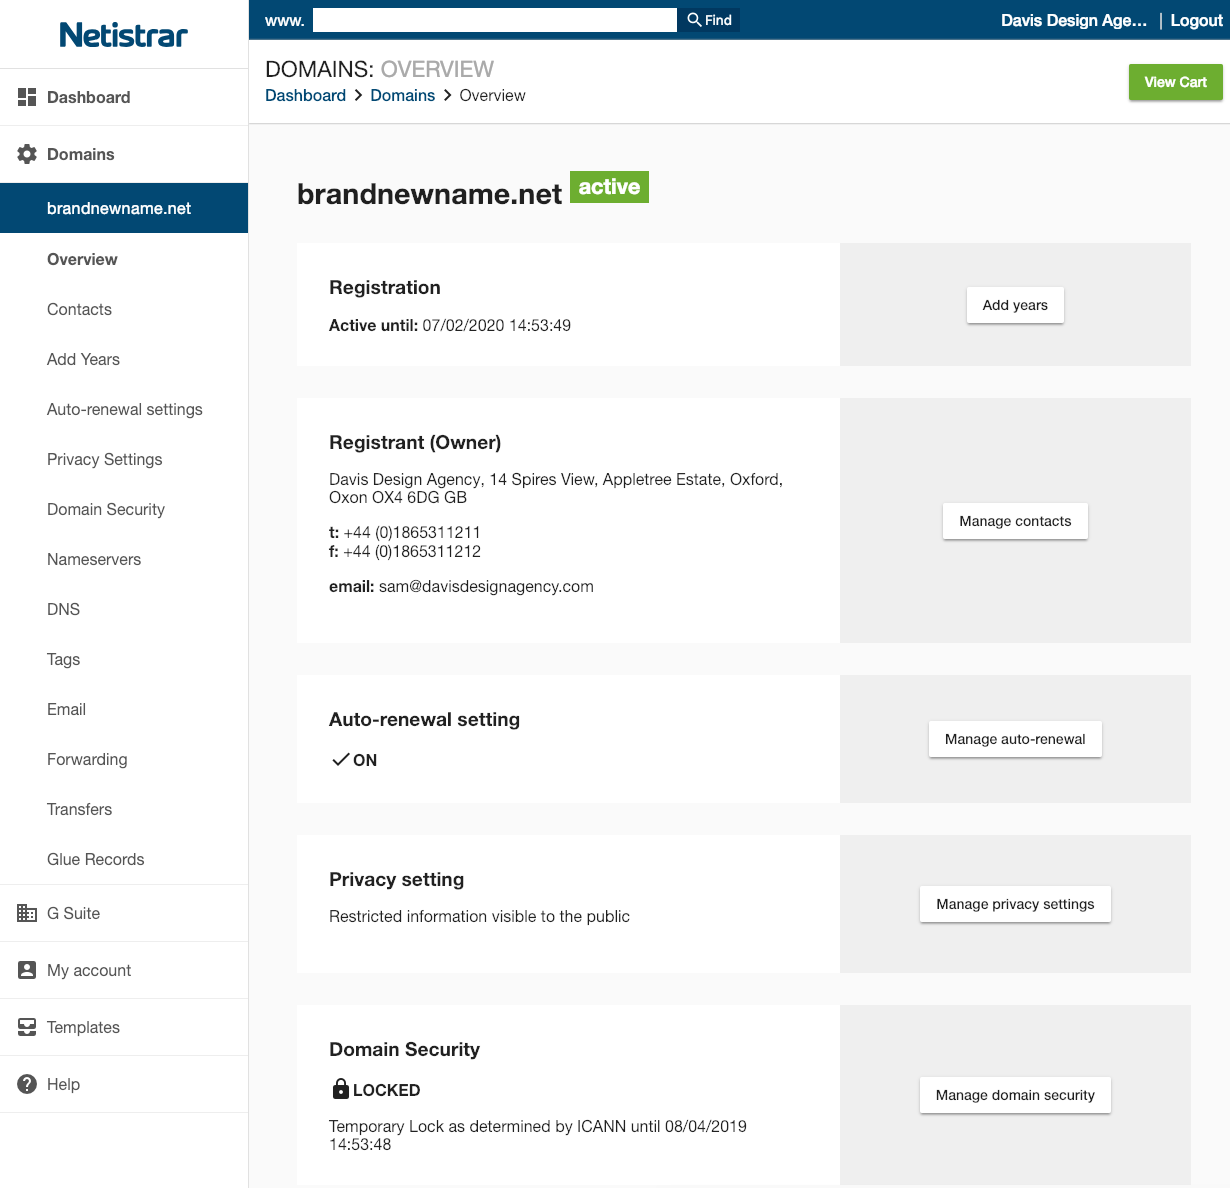 Netistrar Dashboard domains overview